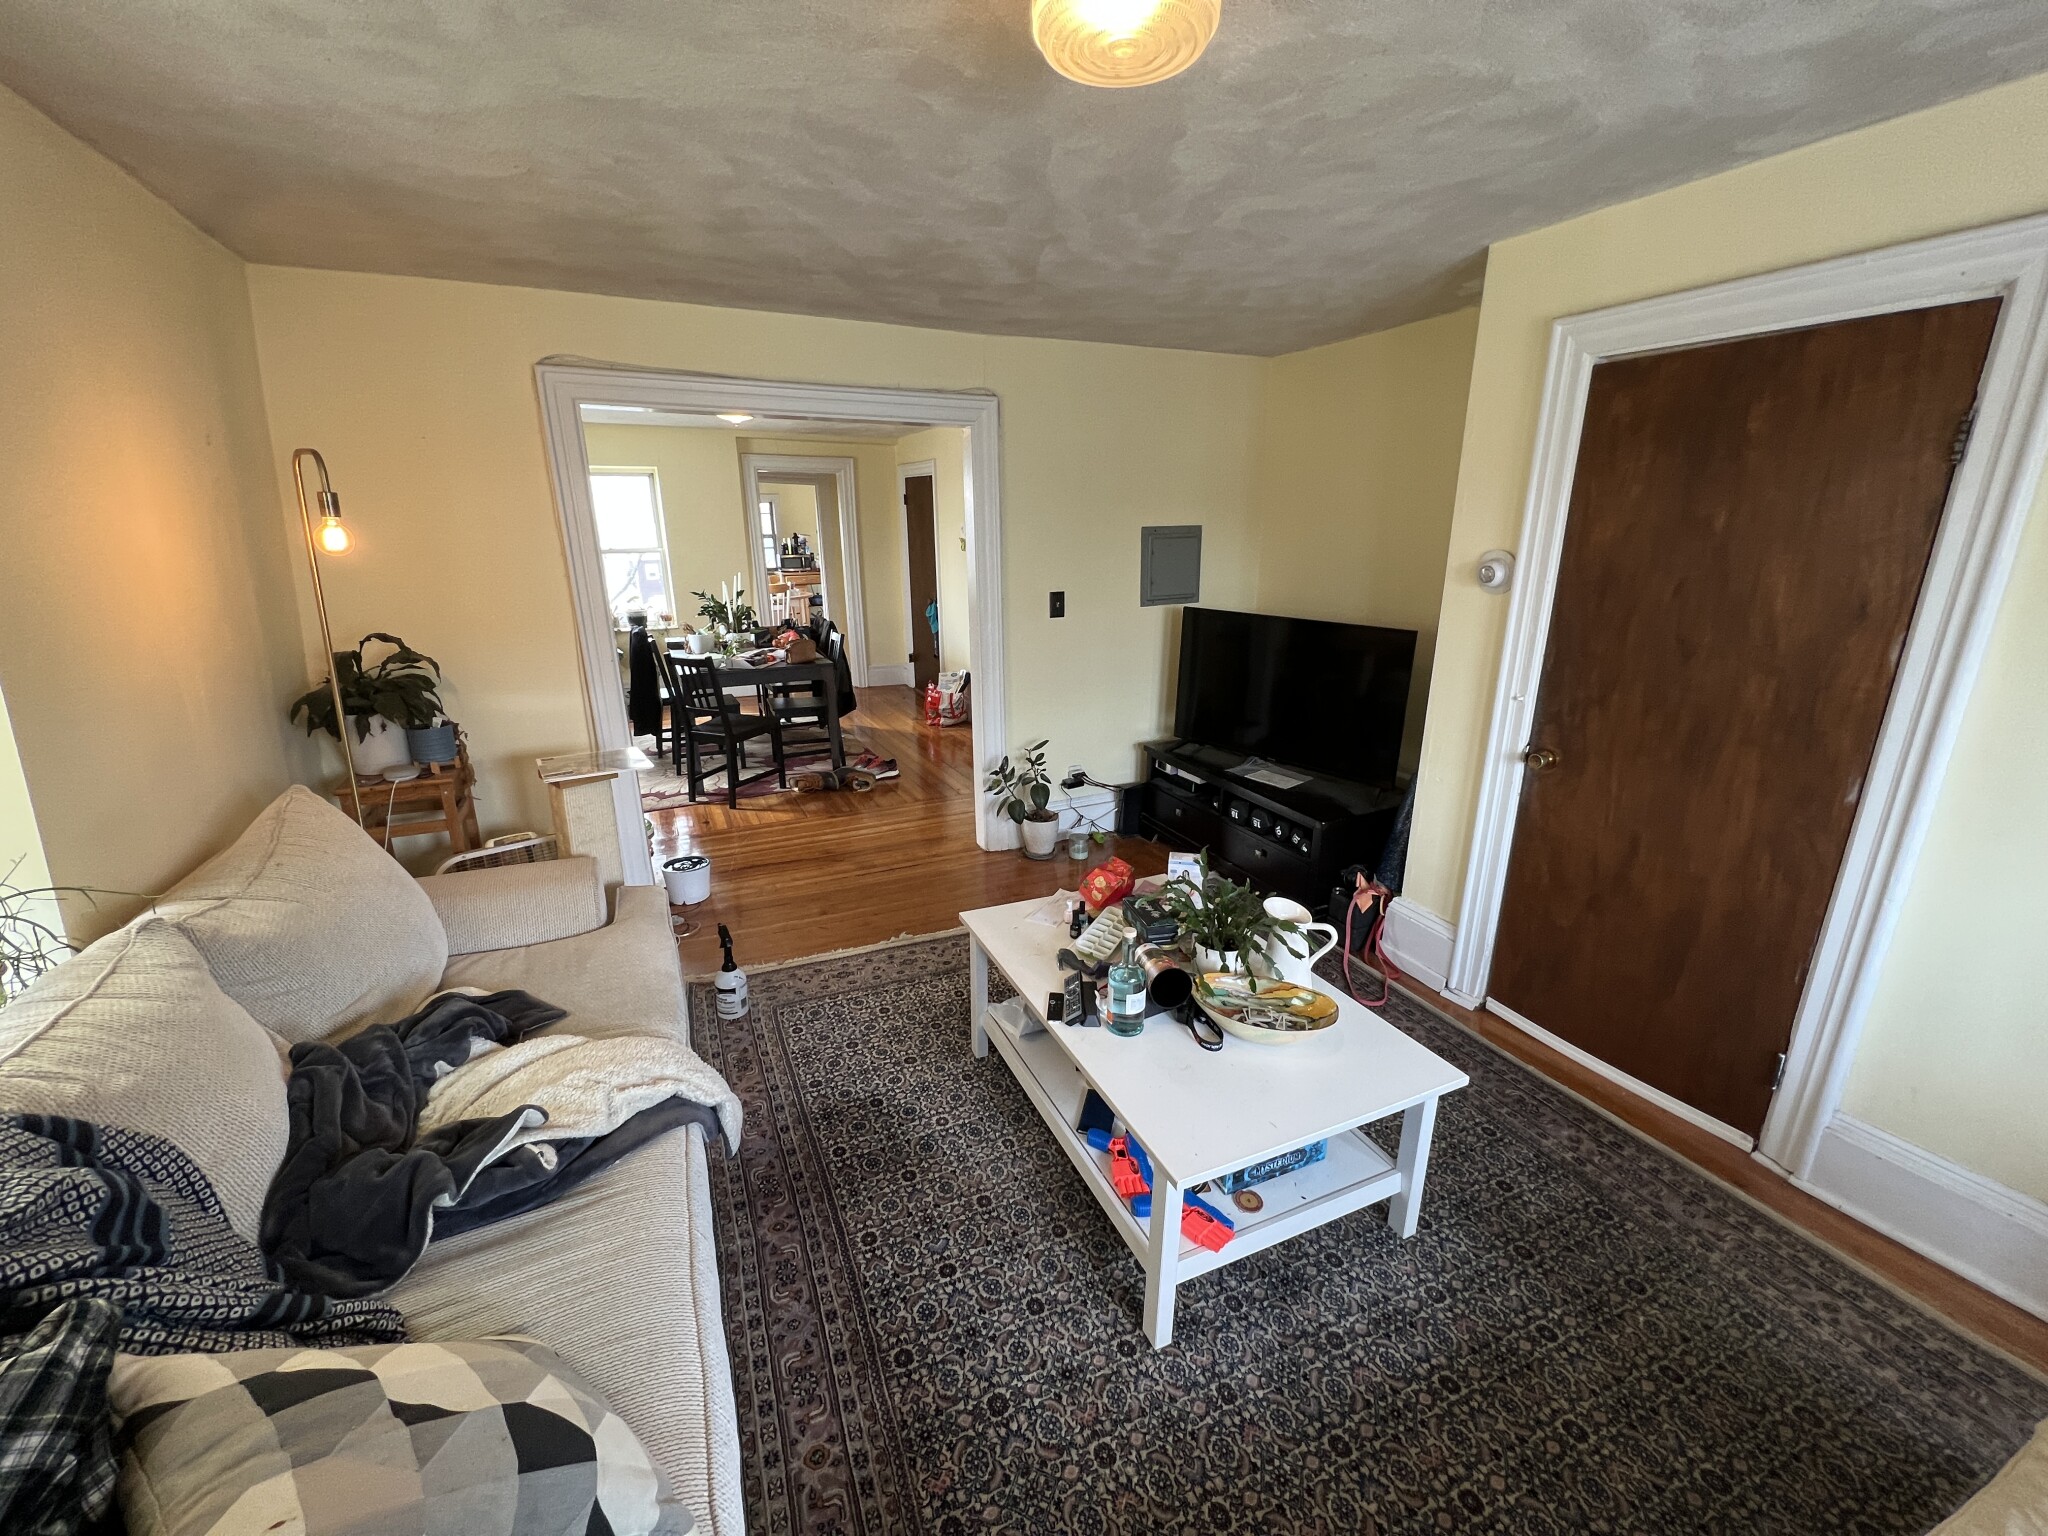 Photos of apartment on Charnwood Rd.,Somerville MA 02144